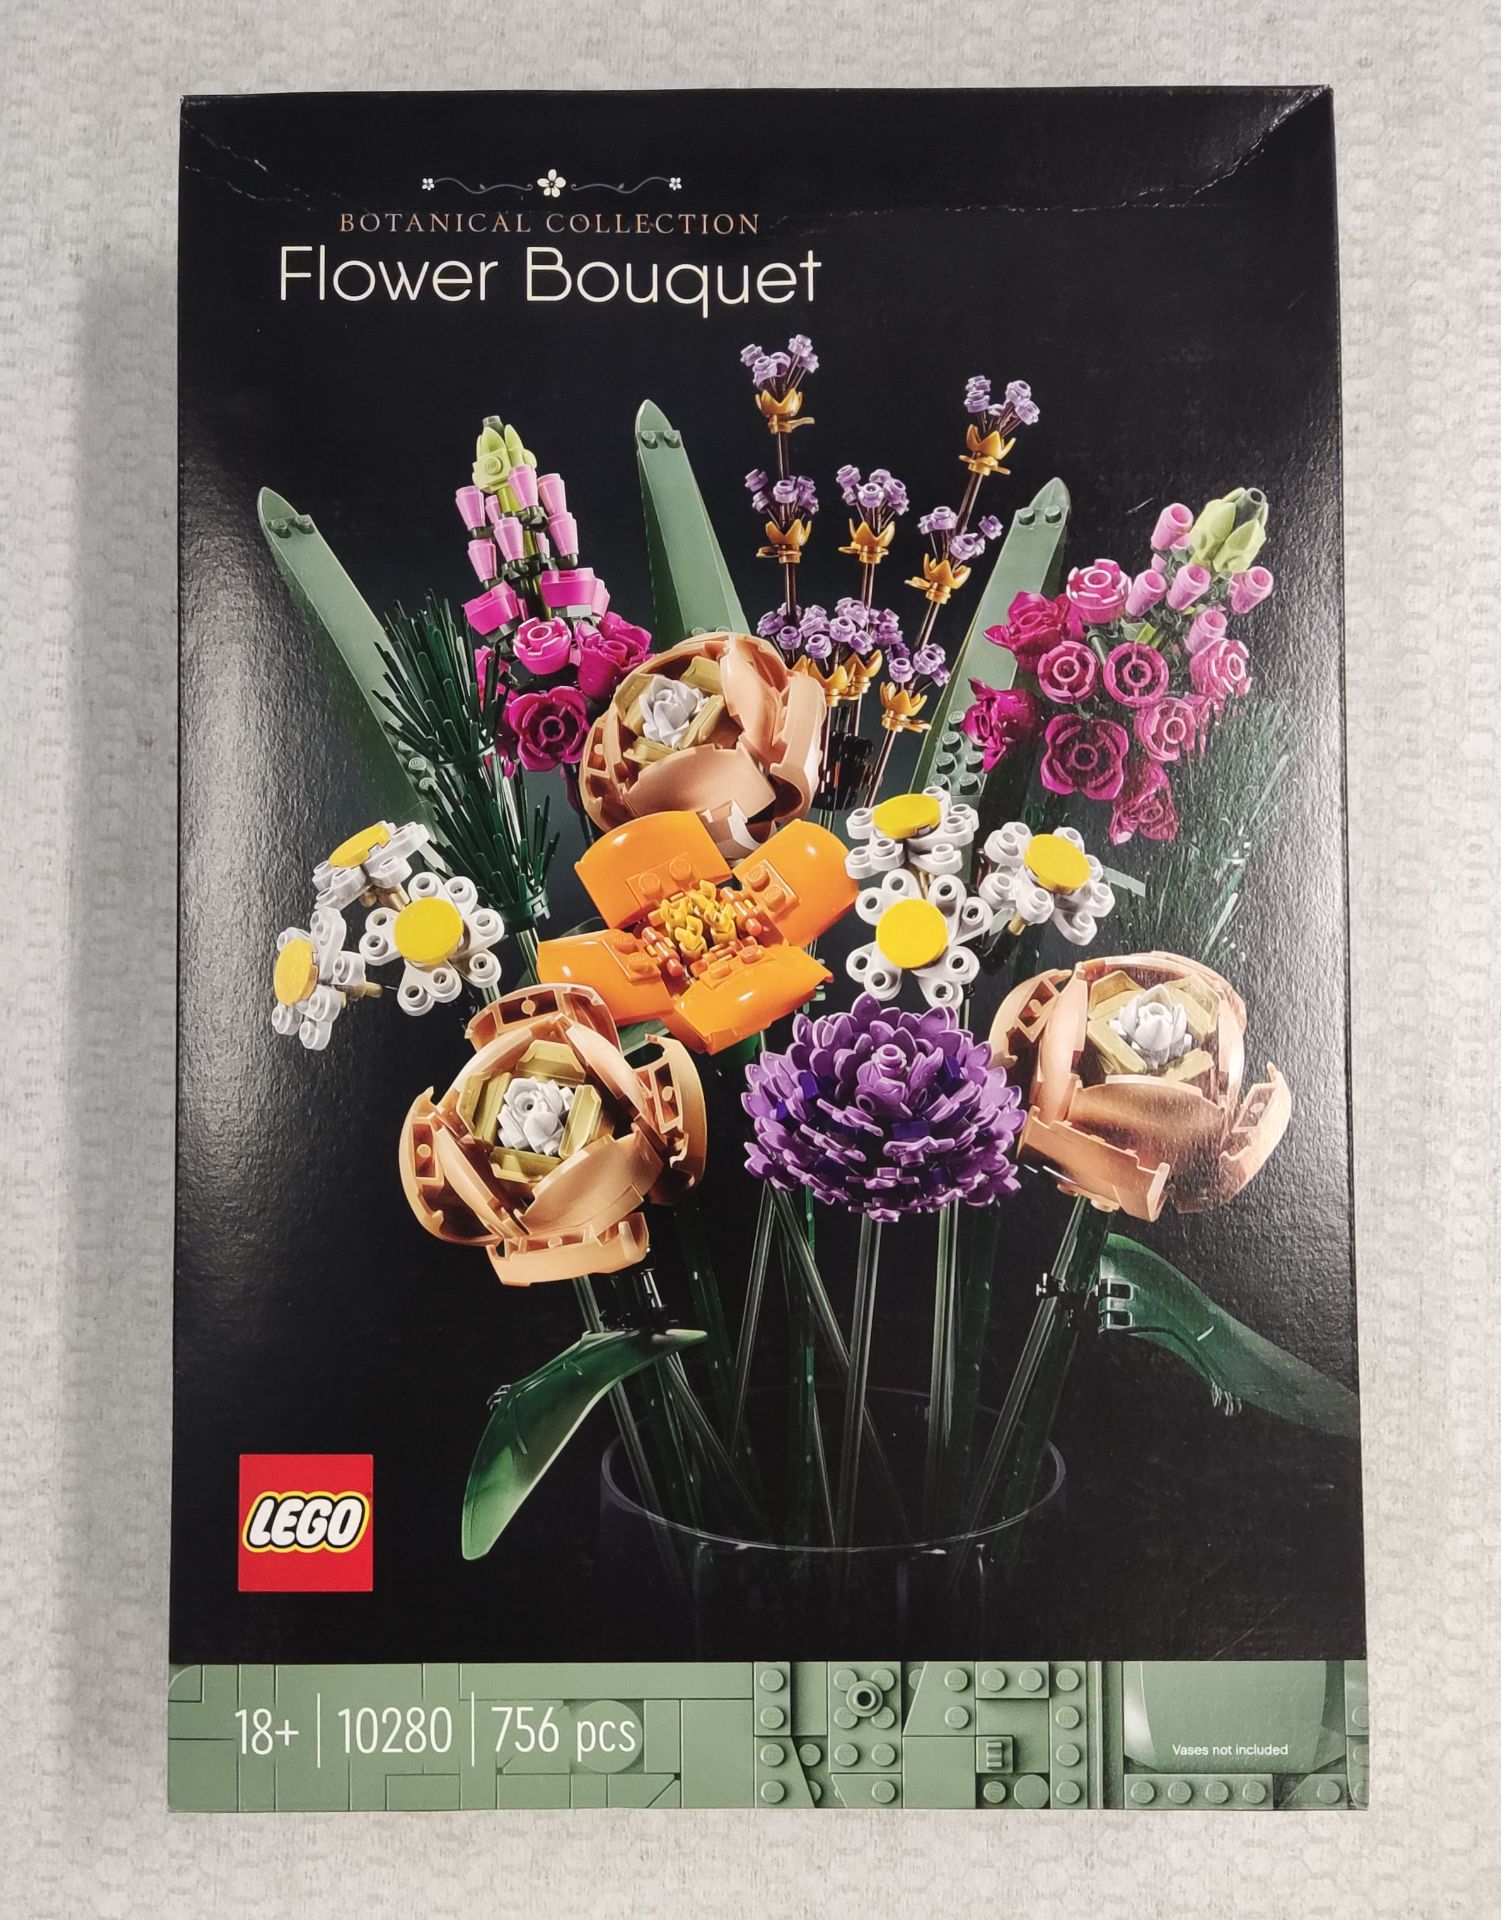 1 x Lego Botanical Collection Flower Bouquet - Model 10280 - New/Boxed - Image 2 of 8